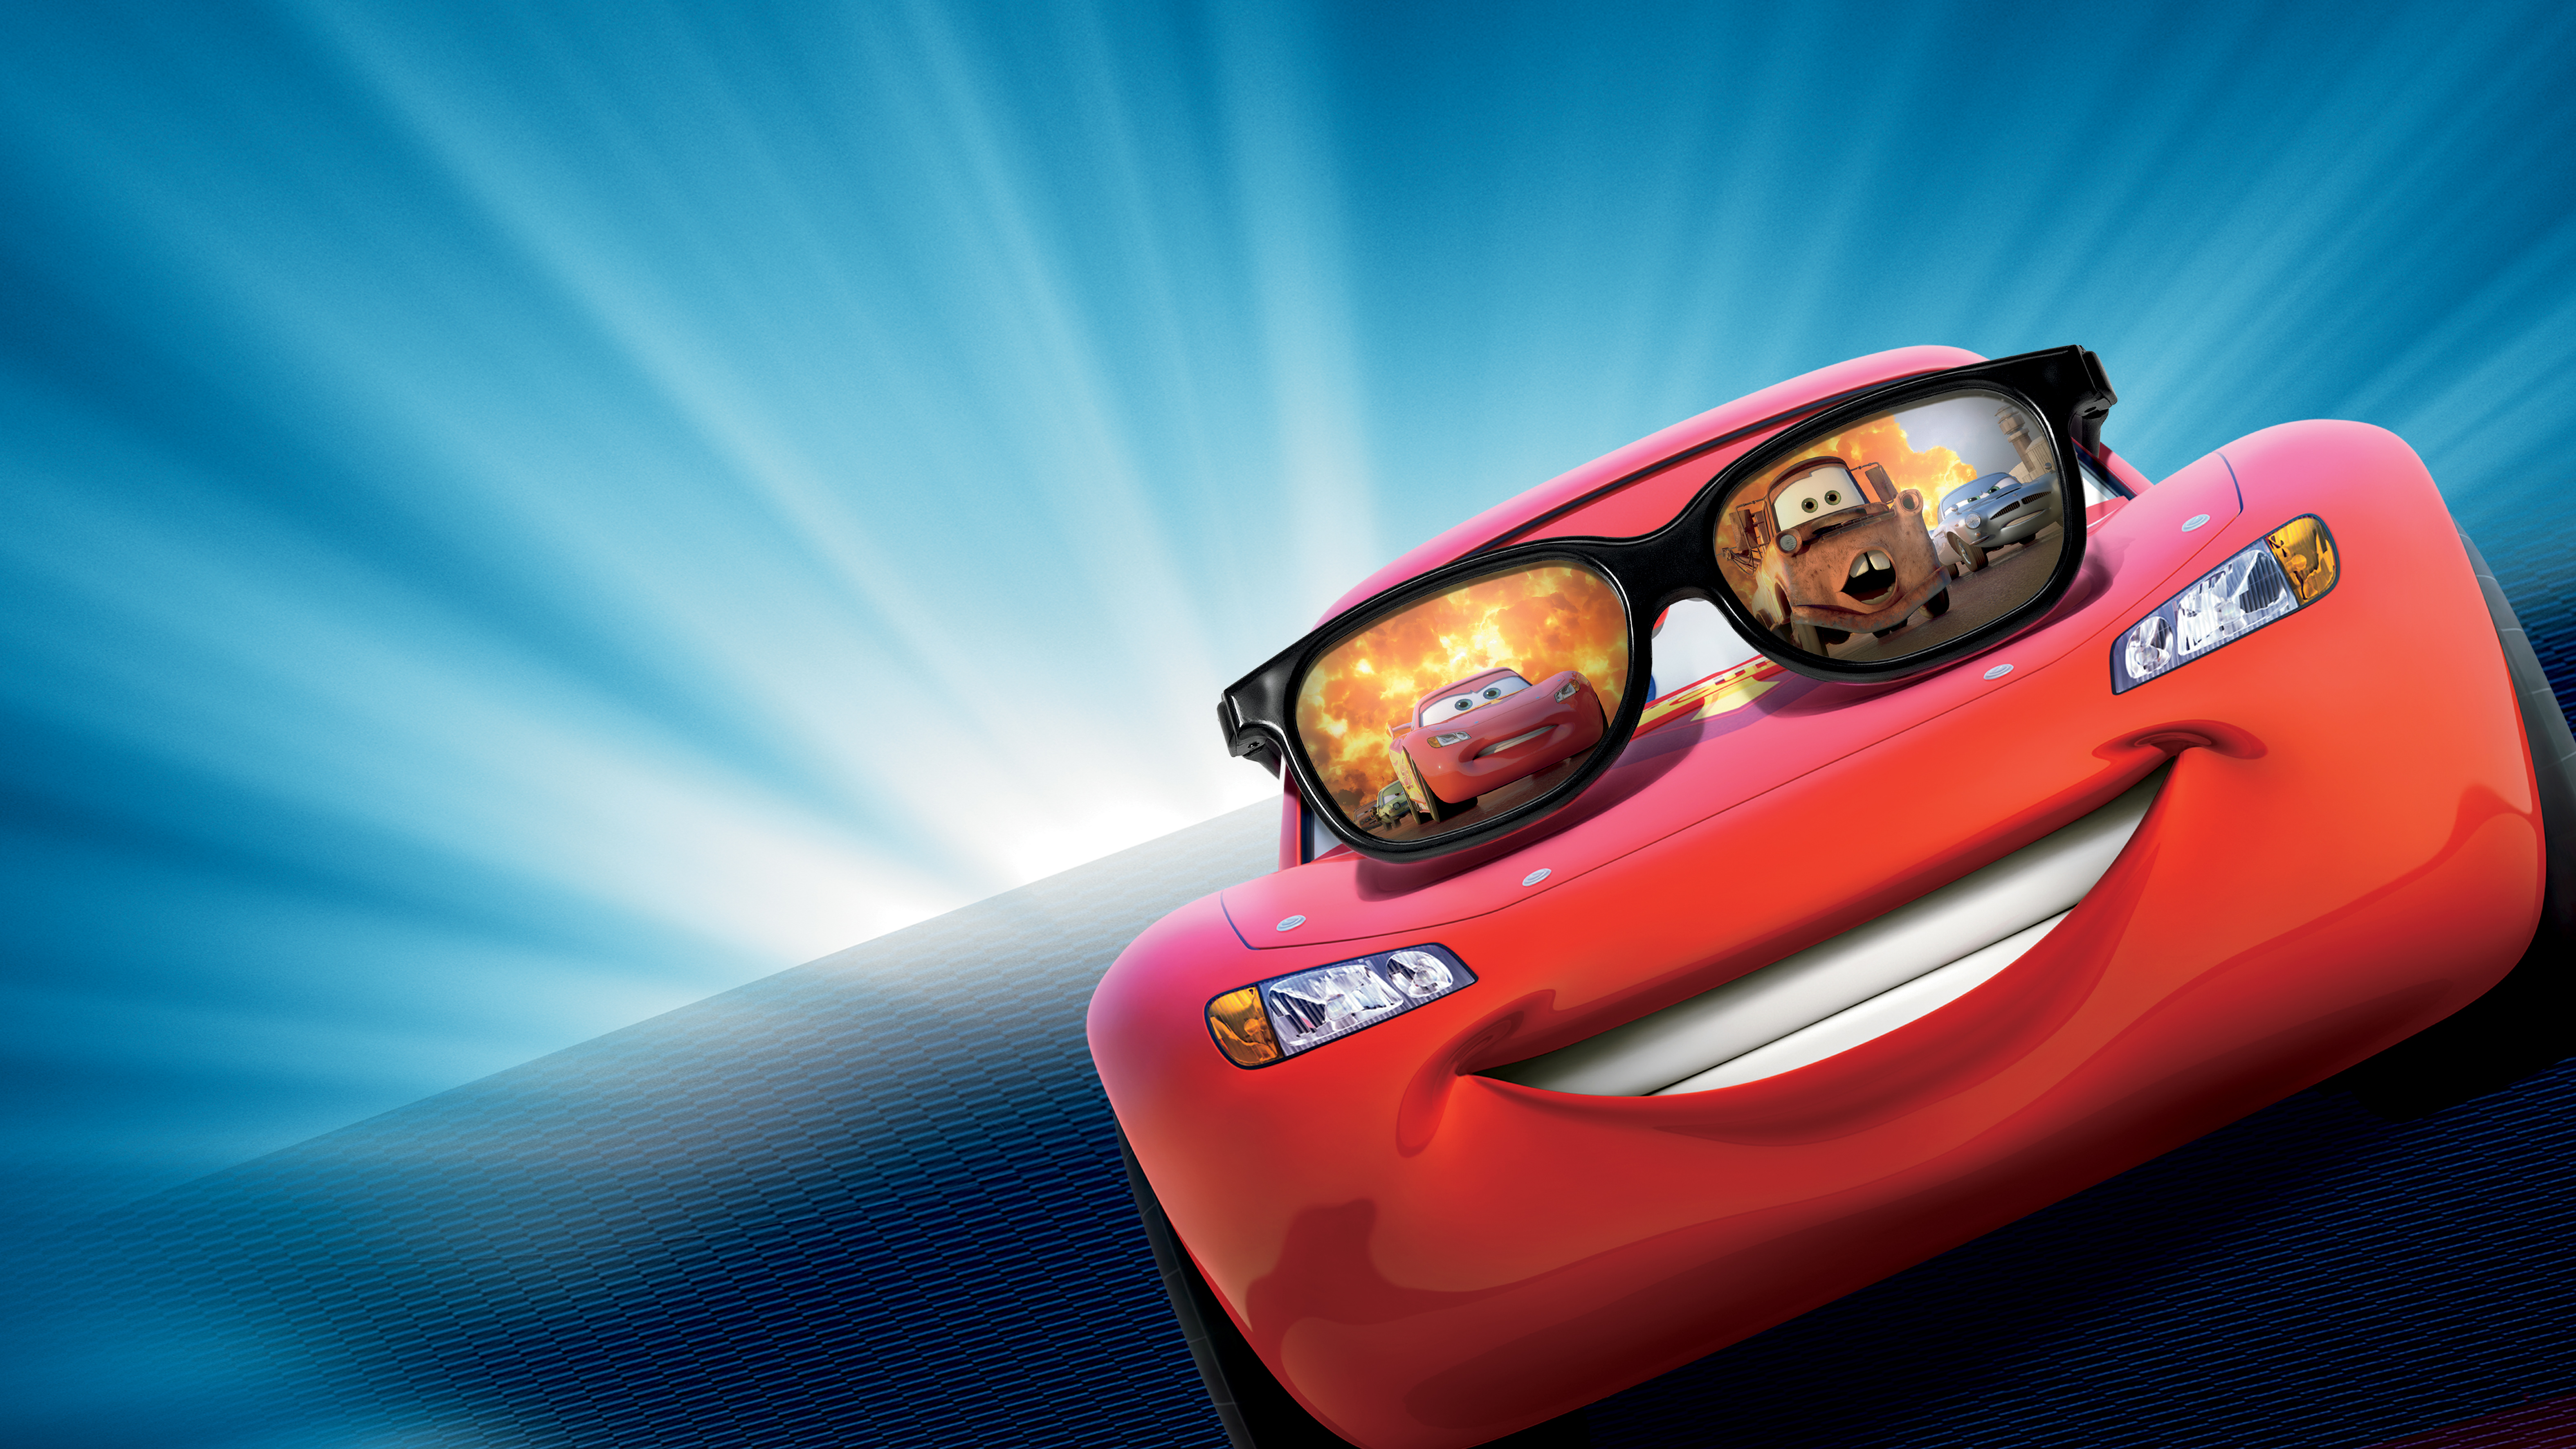  Lightning Mcqueen HQ Background Images